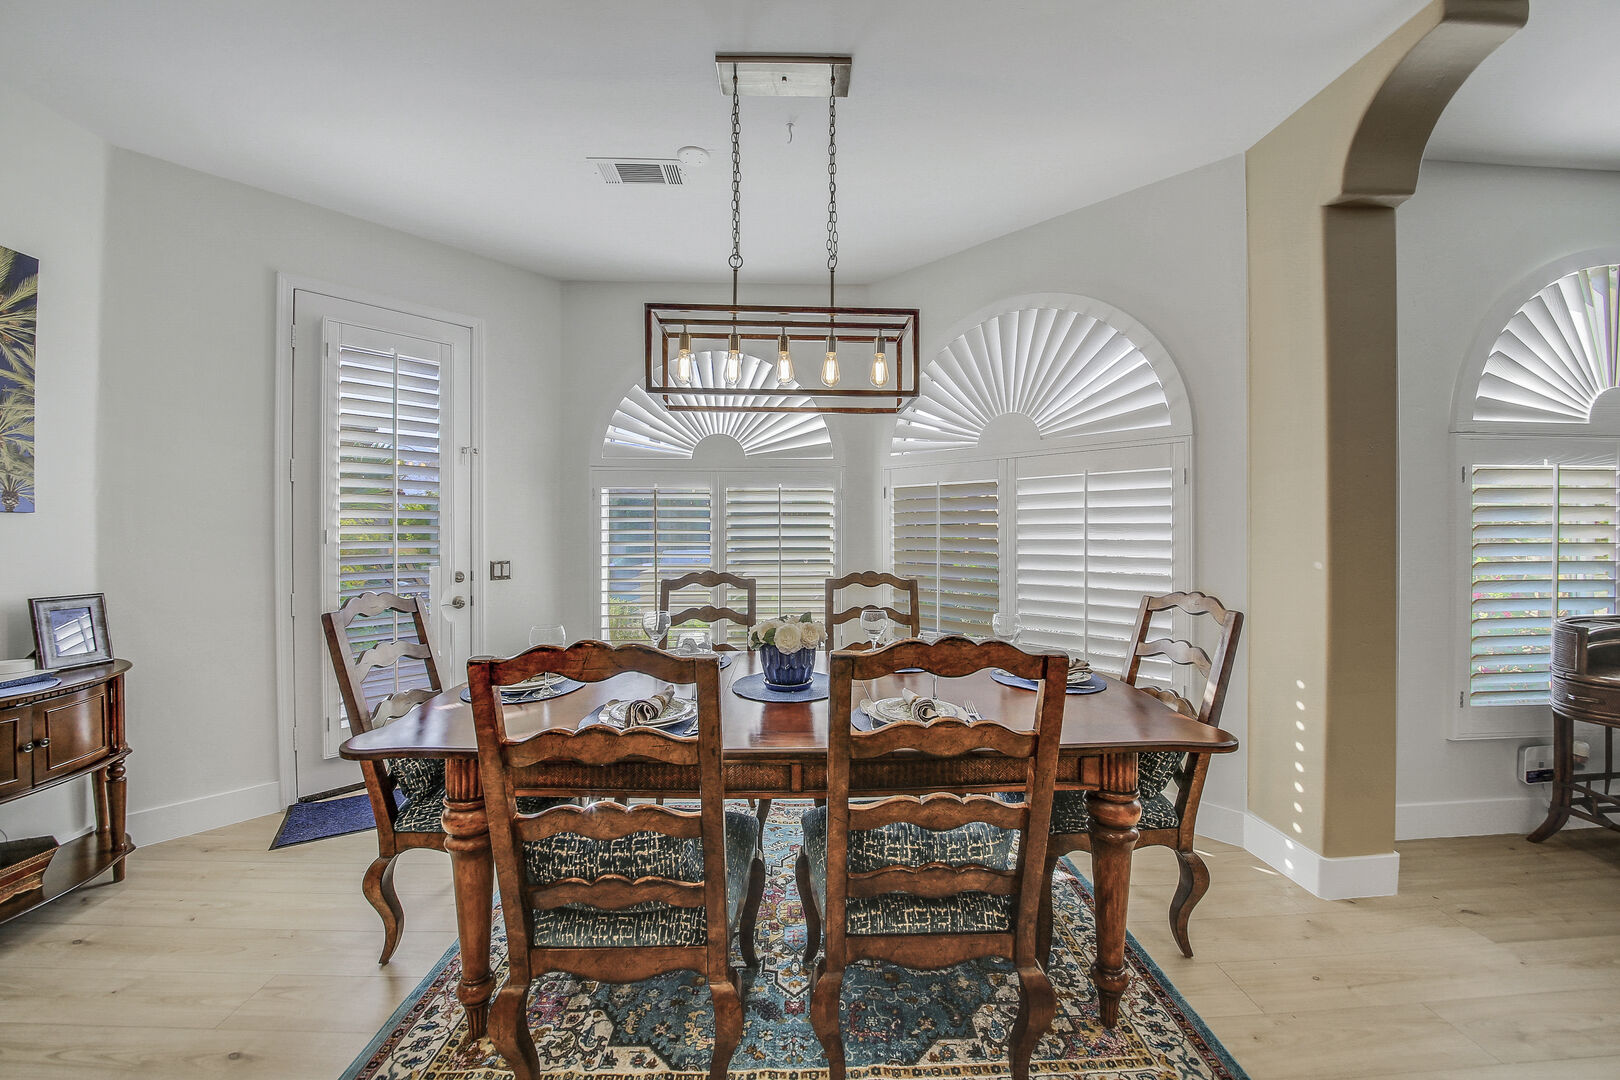 The casual dining area features a dining table with seating for six.